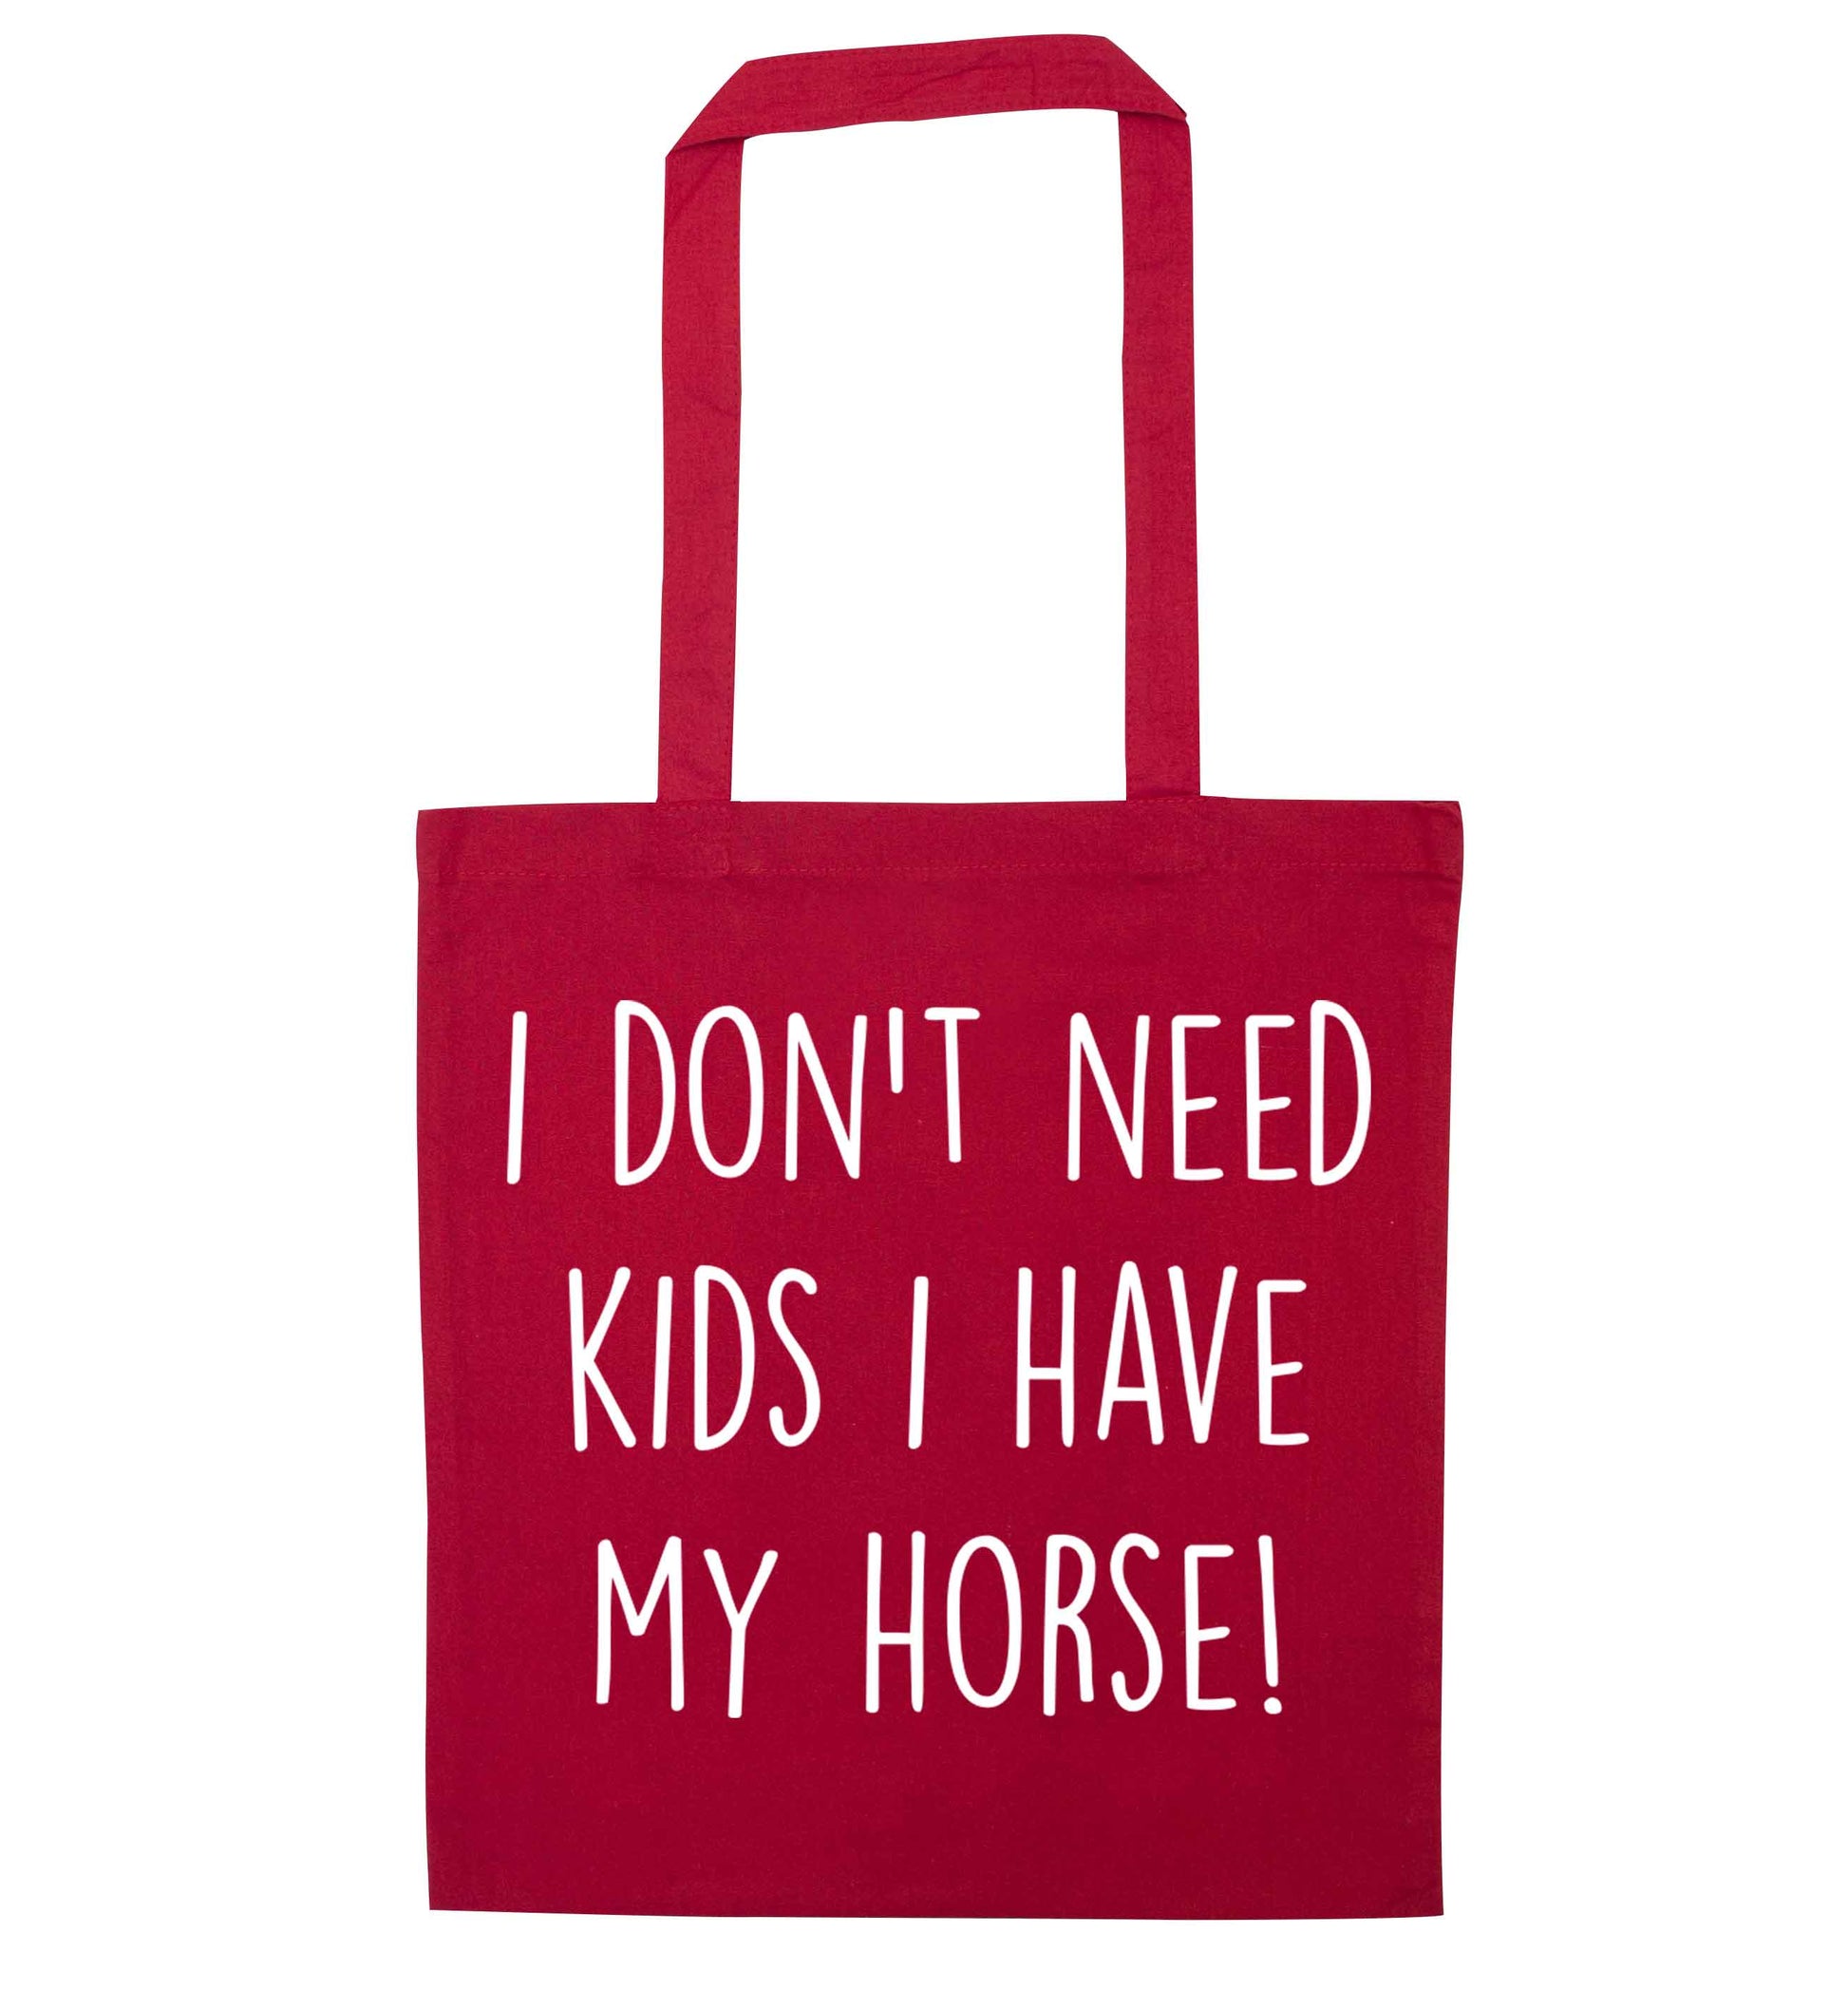 I don't need kids I have my horse red tote bag